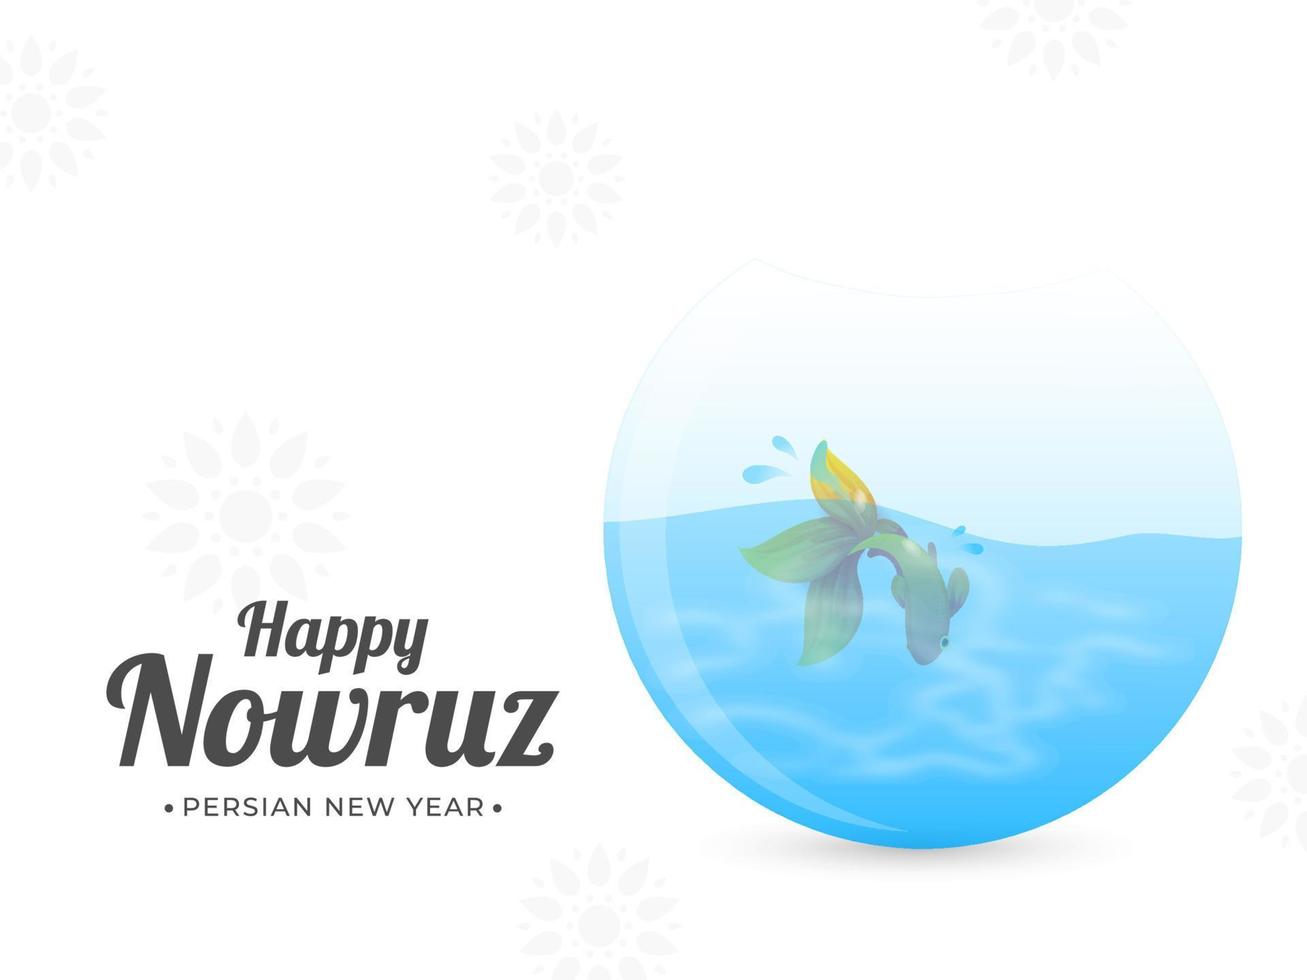 Happy Nowruz, Persian New Year Text with Goldfish Bowl on White Mandala Pattern Background. vector